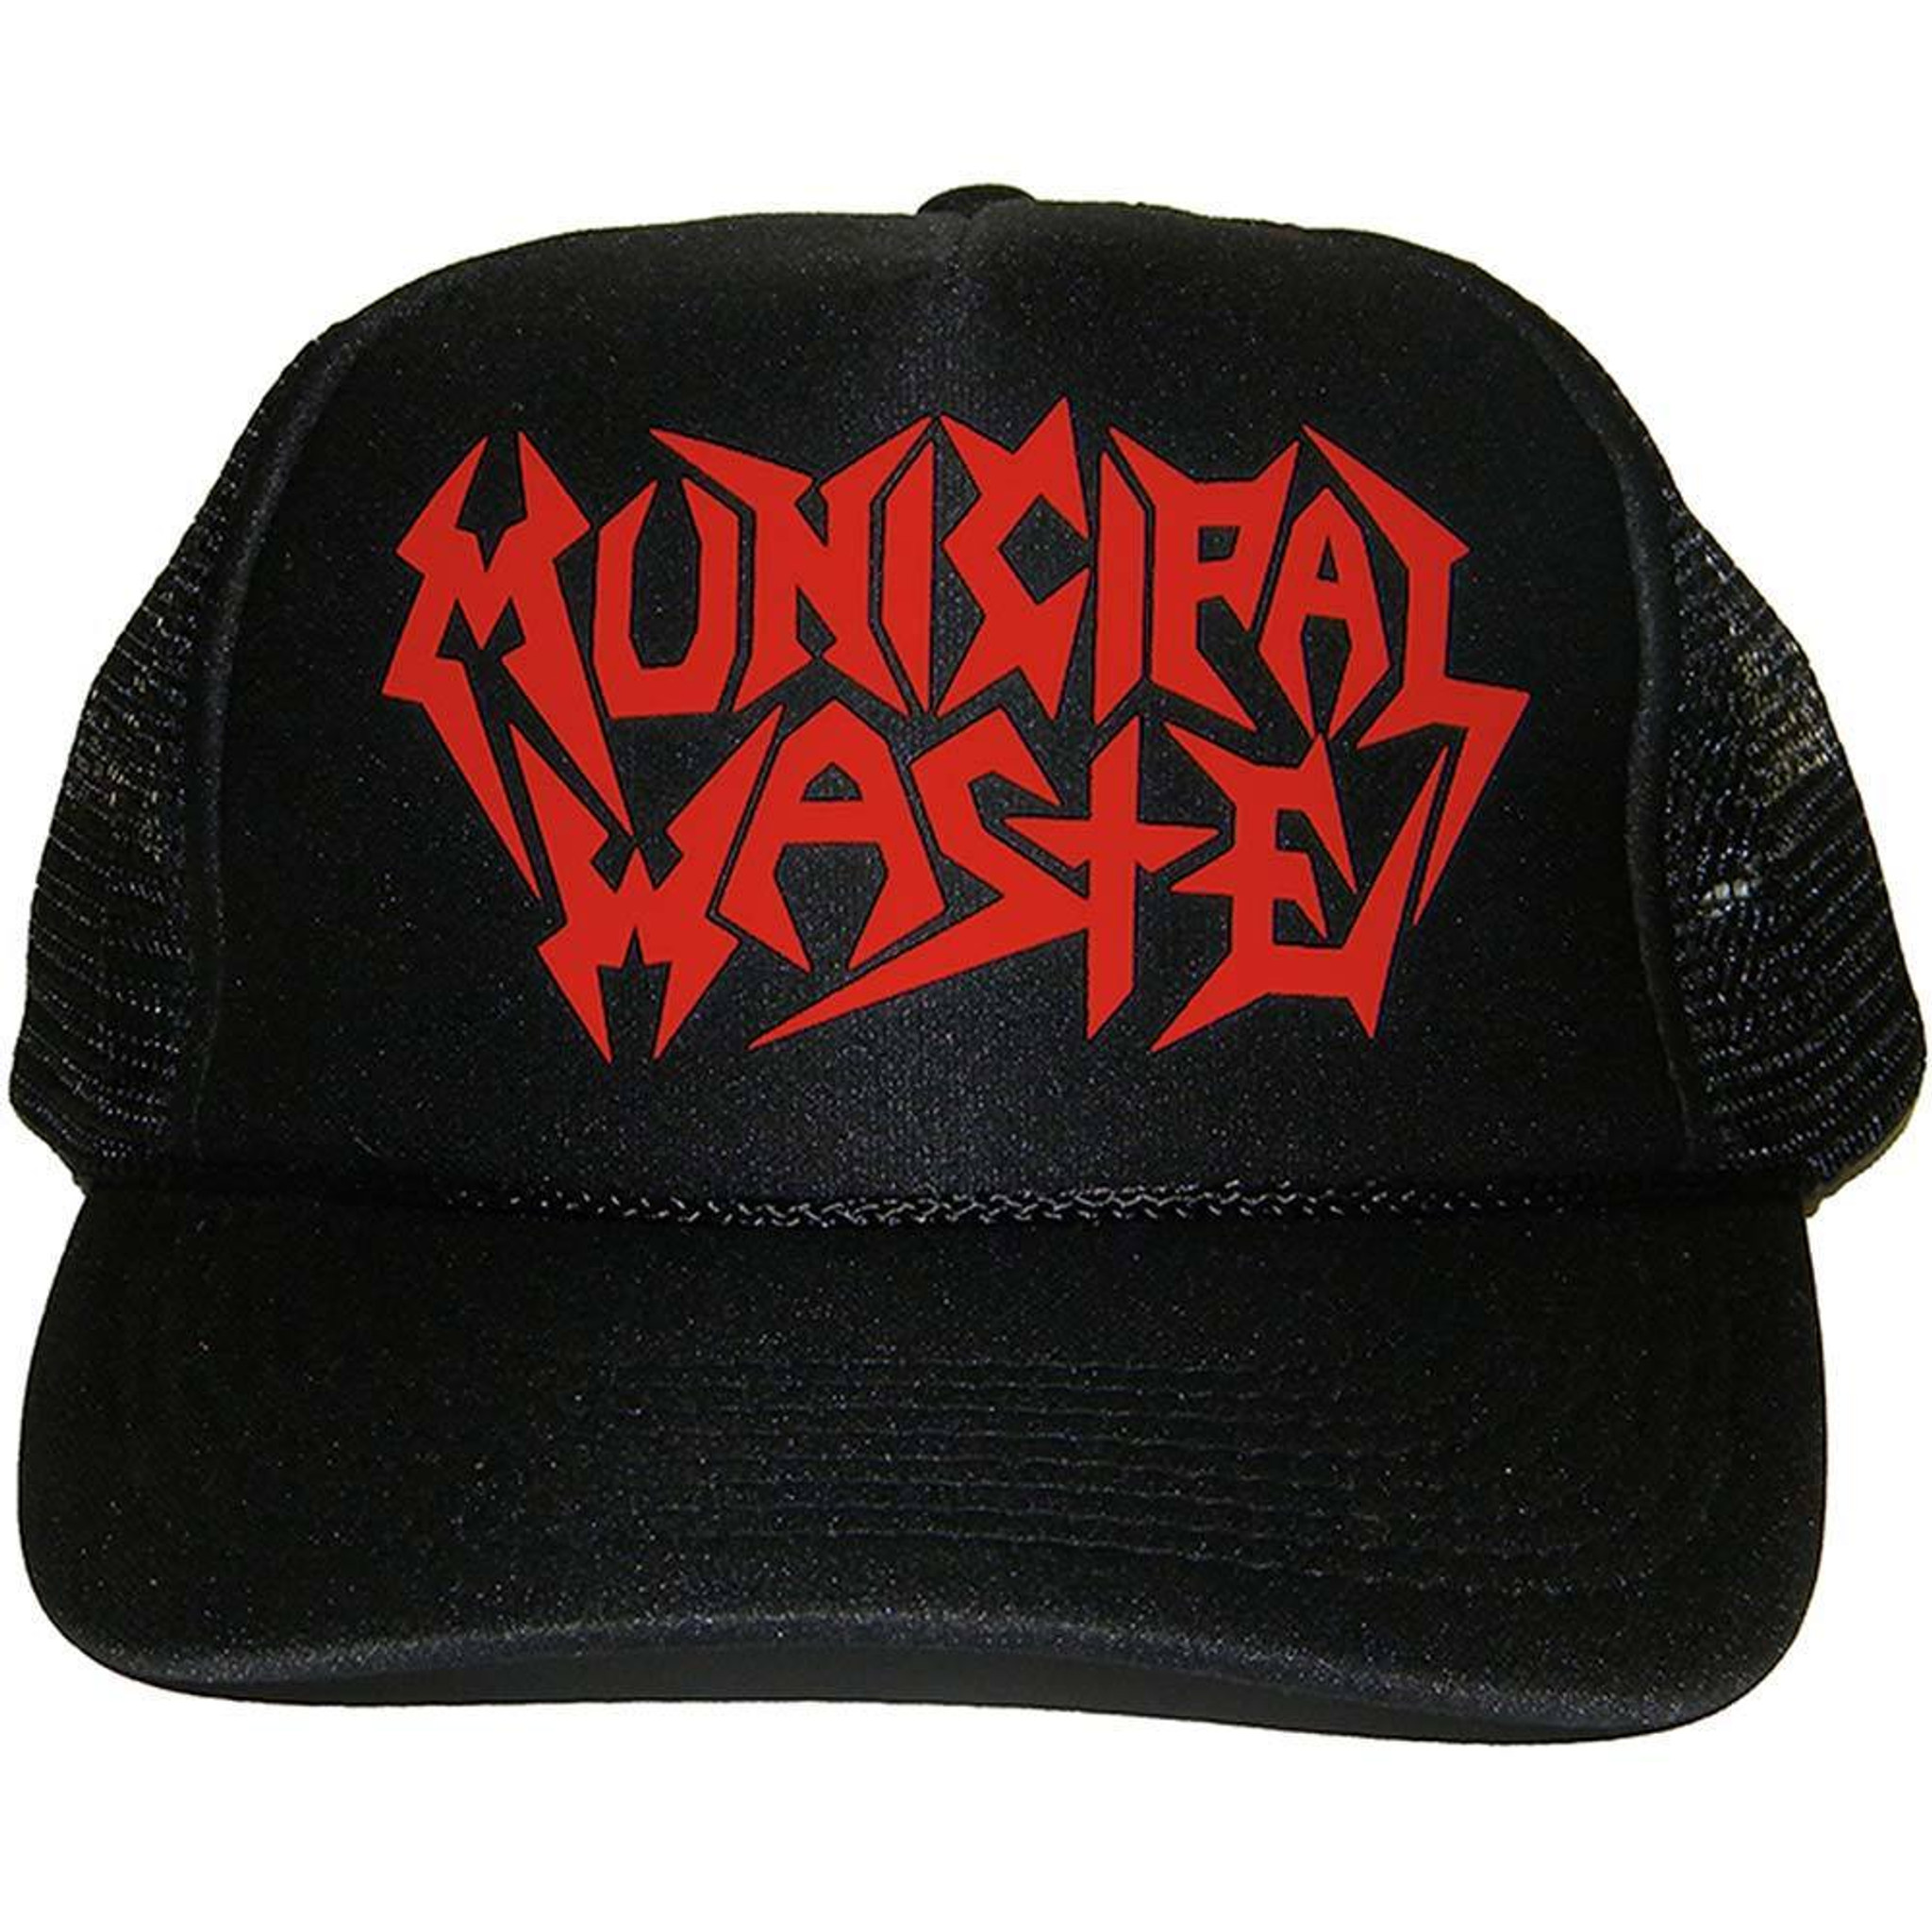 Municipal Waste Wasted Classic Trucker Hat Cap